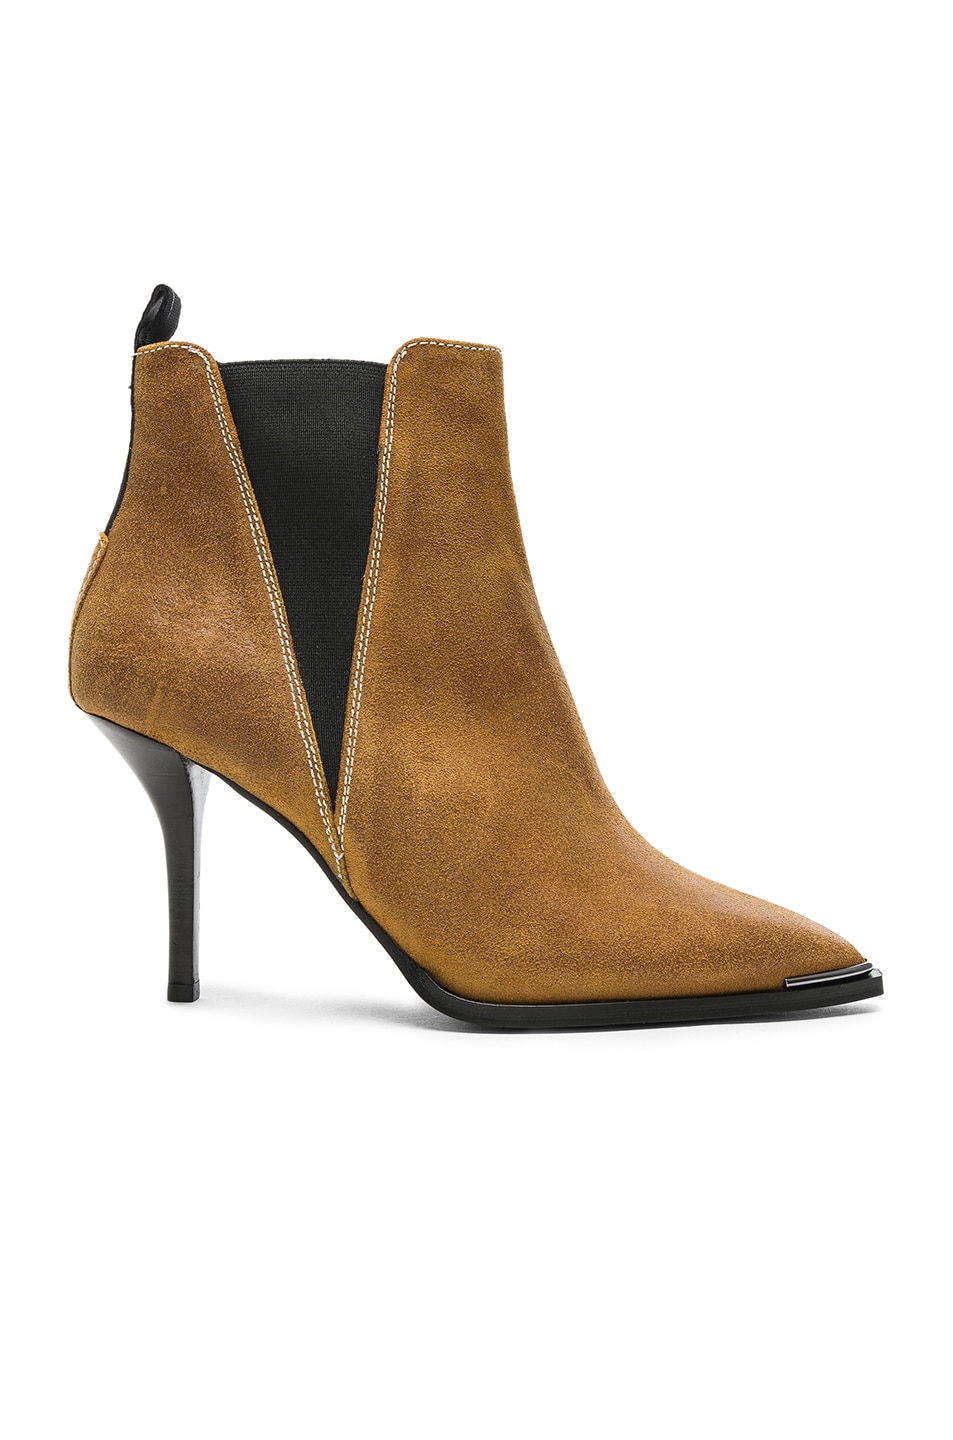 Image 1 of Acne Studios Waxed Suede Jemma Boots in Caramel Brown